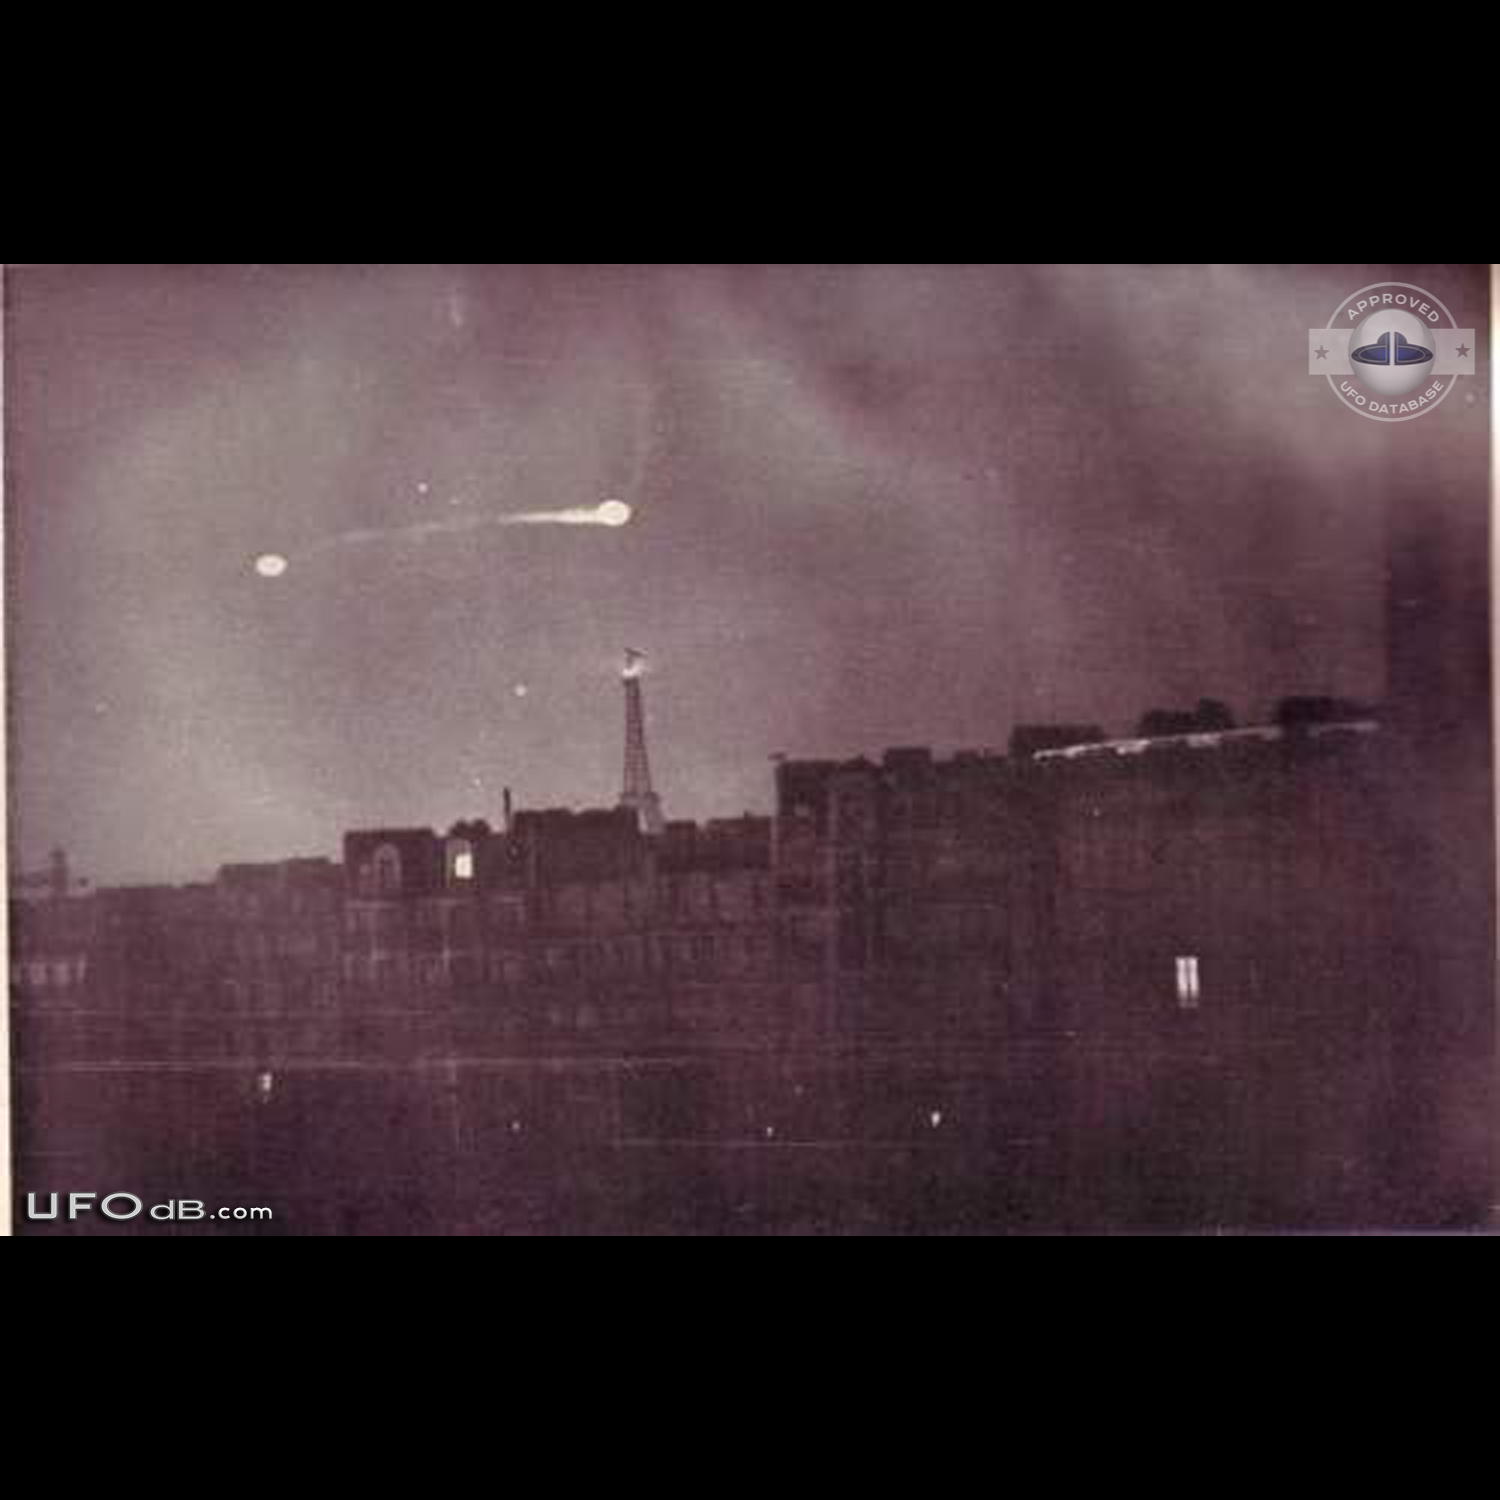 Old 1953 UFO sighting picture caught over Paris, France UFO Picture #543-1